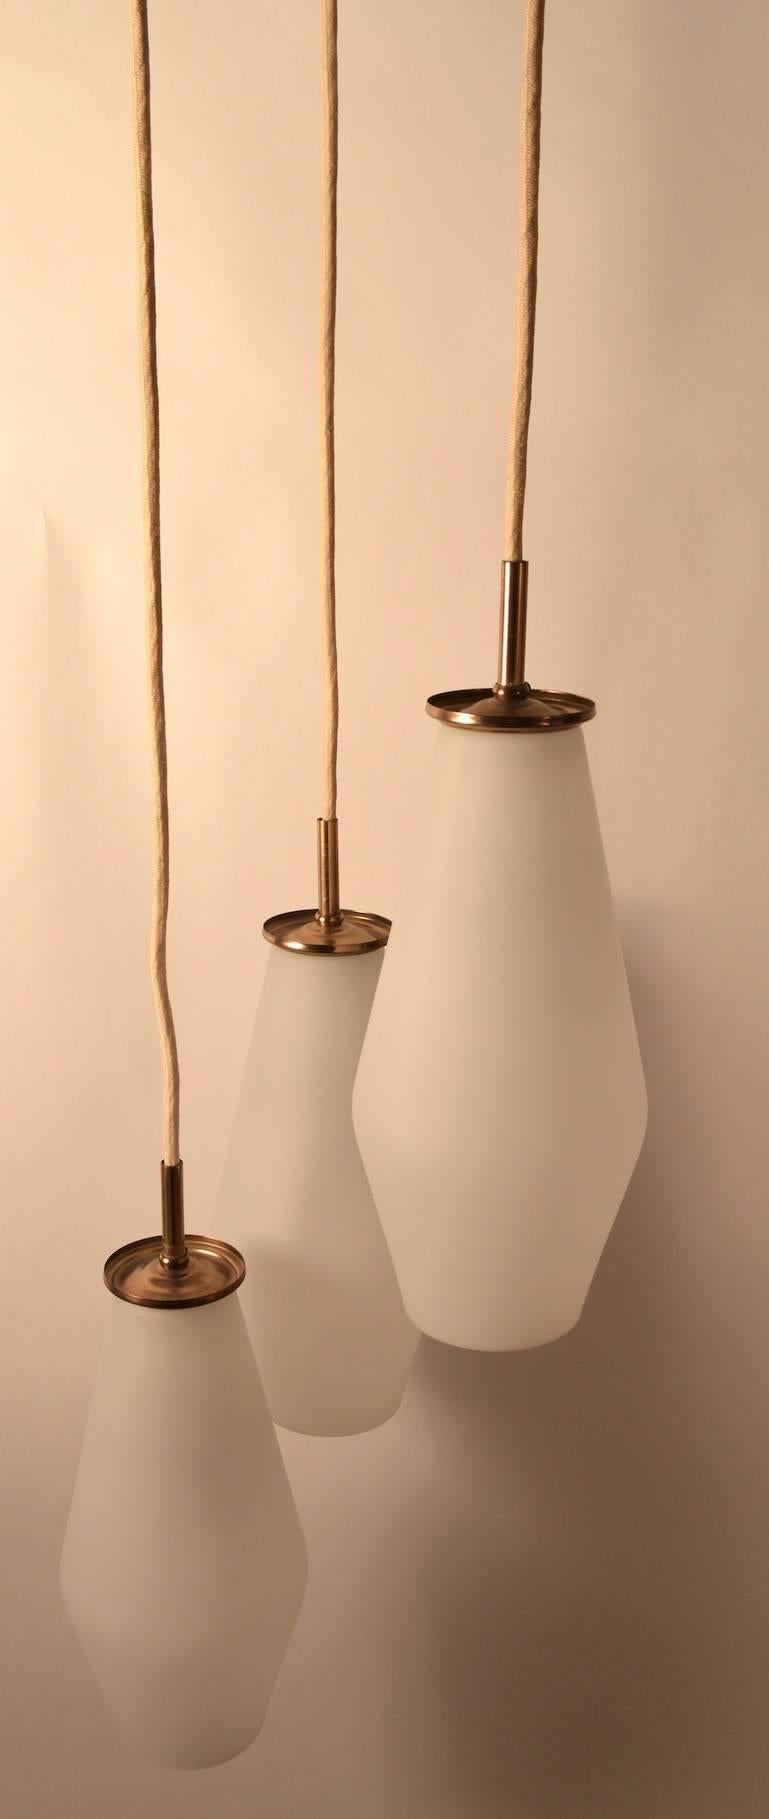  Three frosted white glass globes, brass fitments, woven cords with brass armature and original canopy. Each independent globe can accommodate  up to 100W, however I recommend 60W each. Total drop currently 80